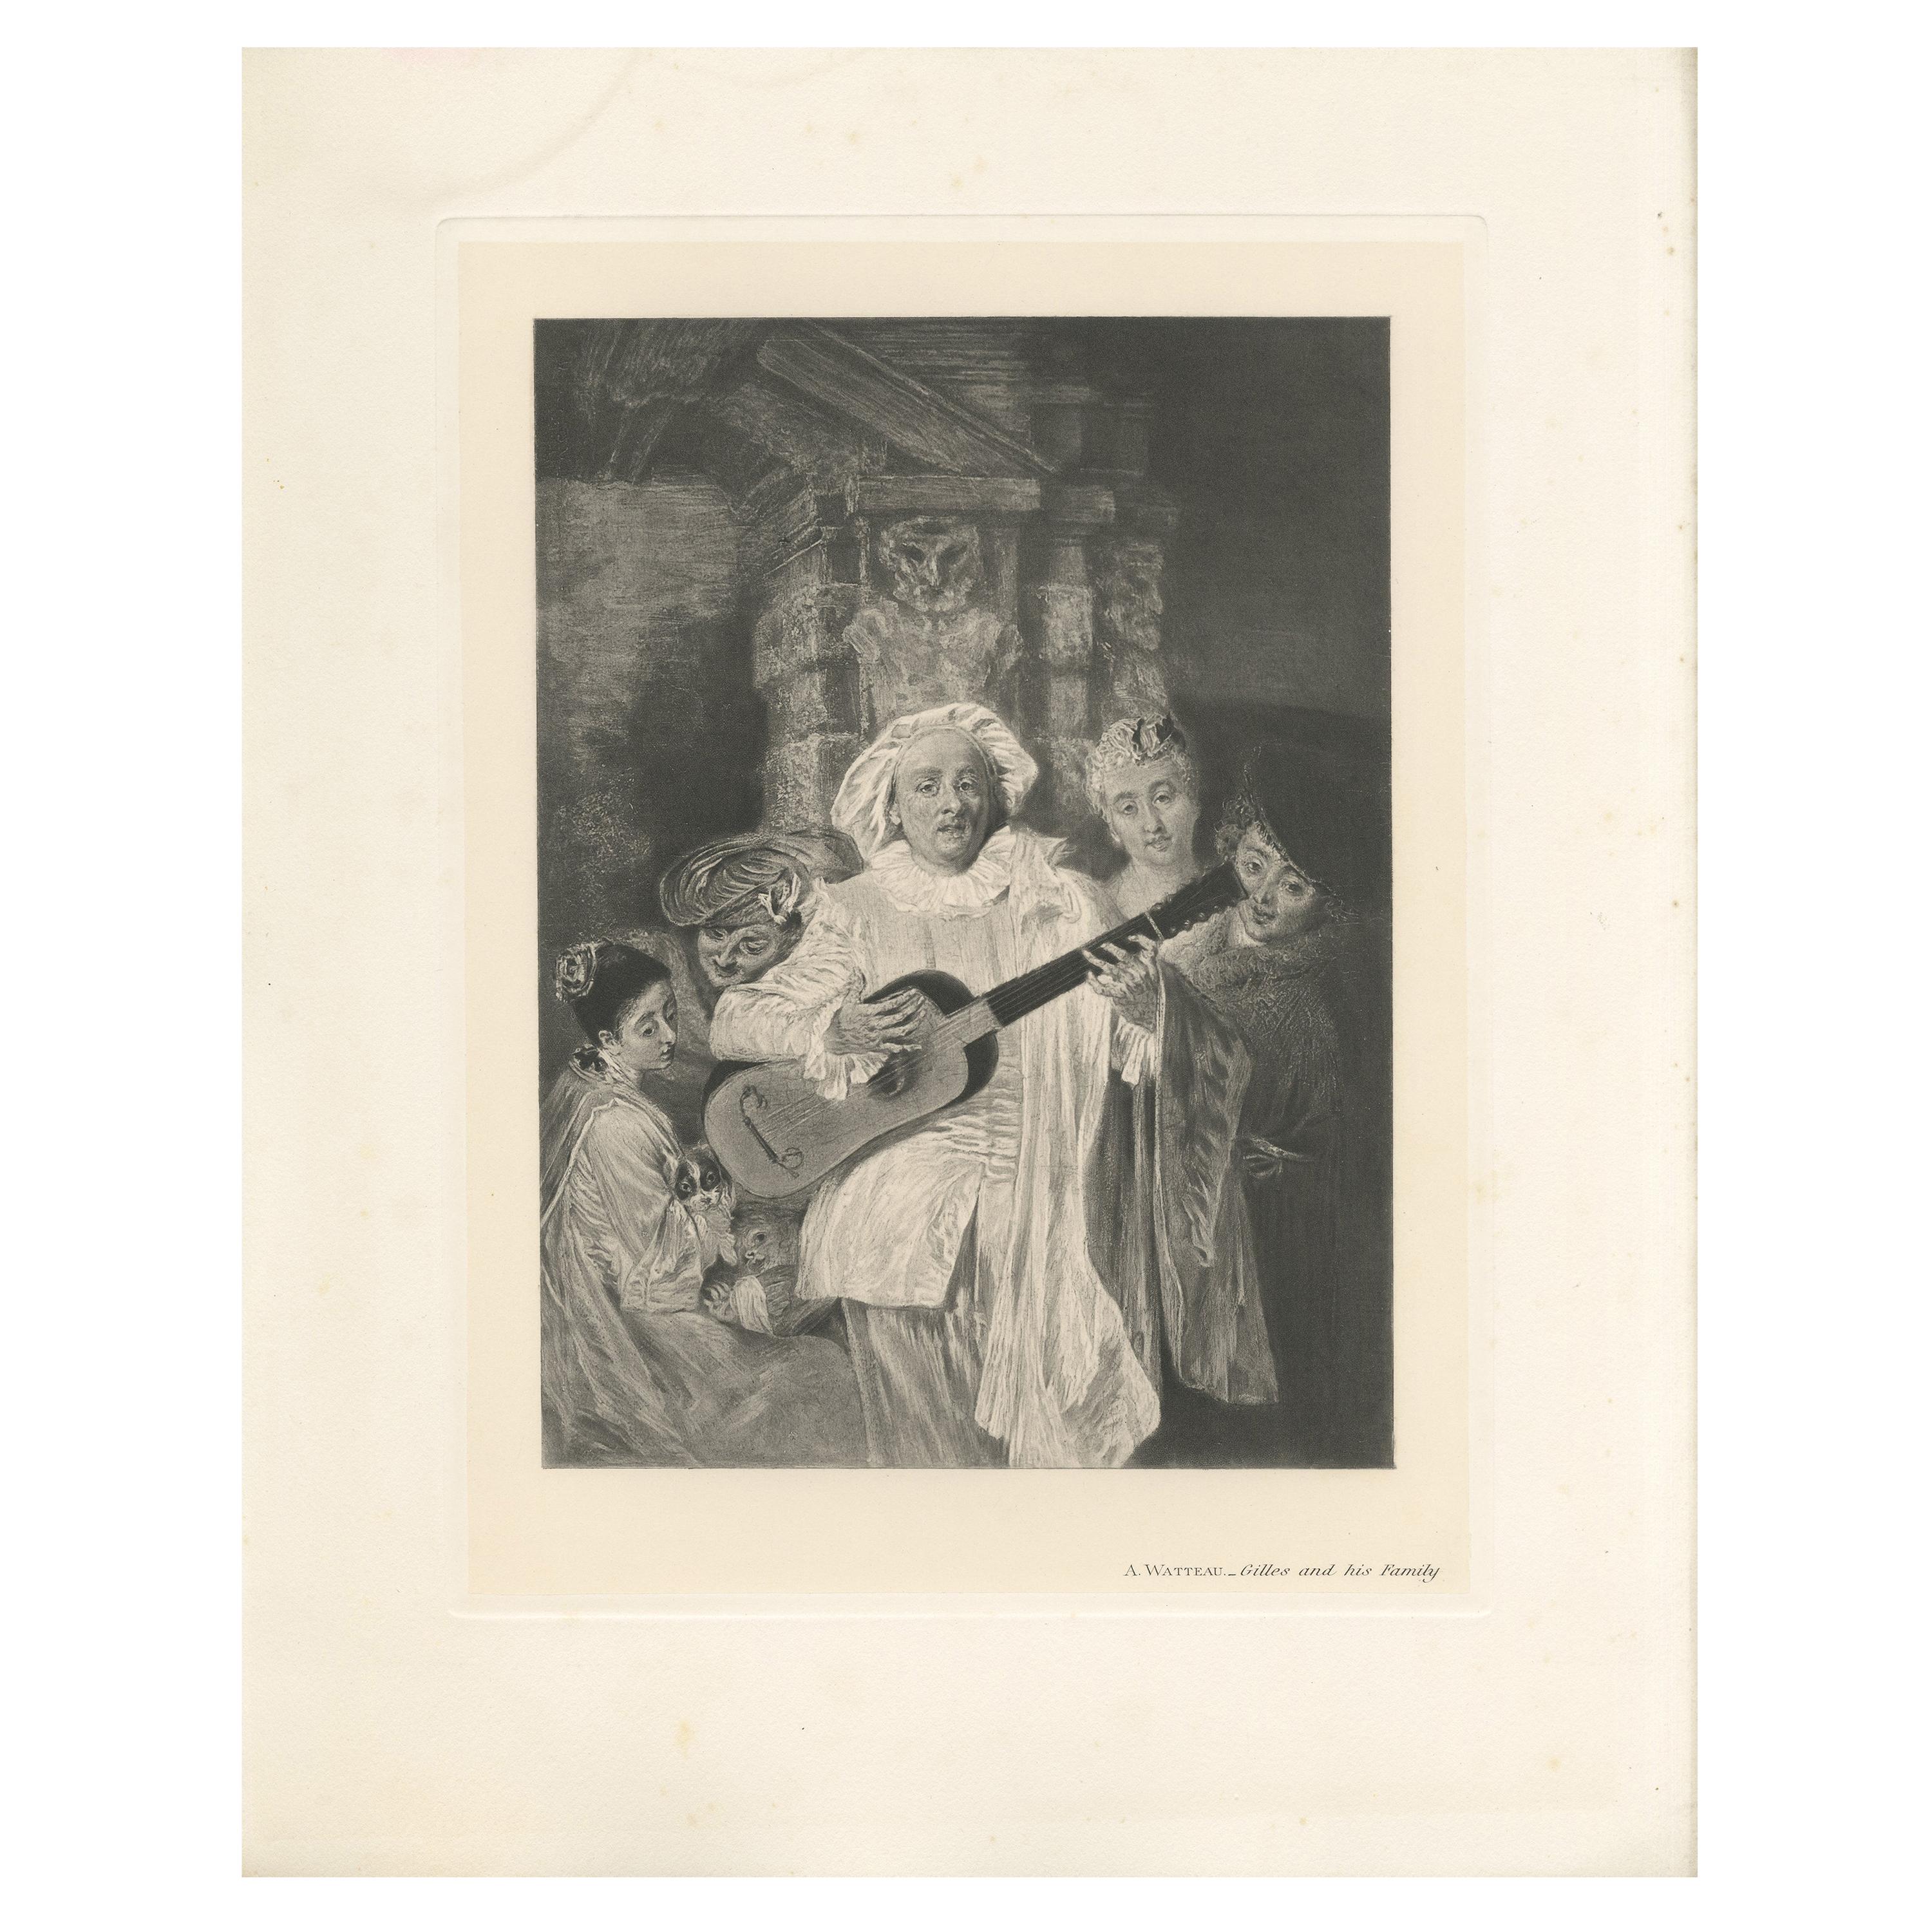 Antique Print of 'Gilles and his Family' Made after A. Watteau '1902'